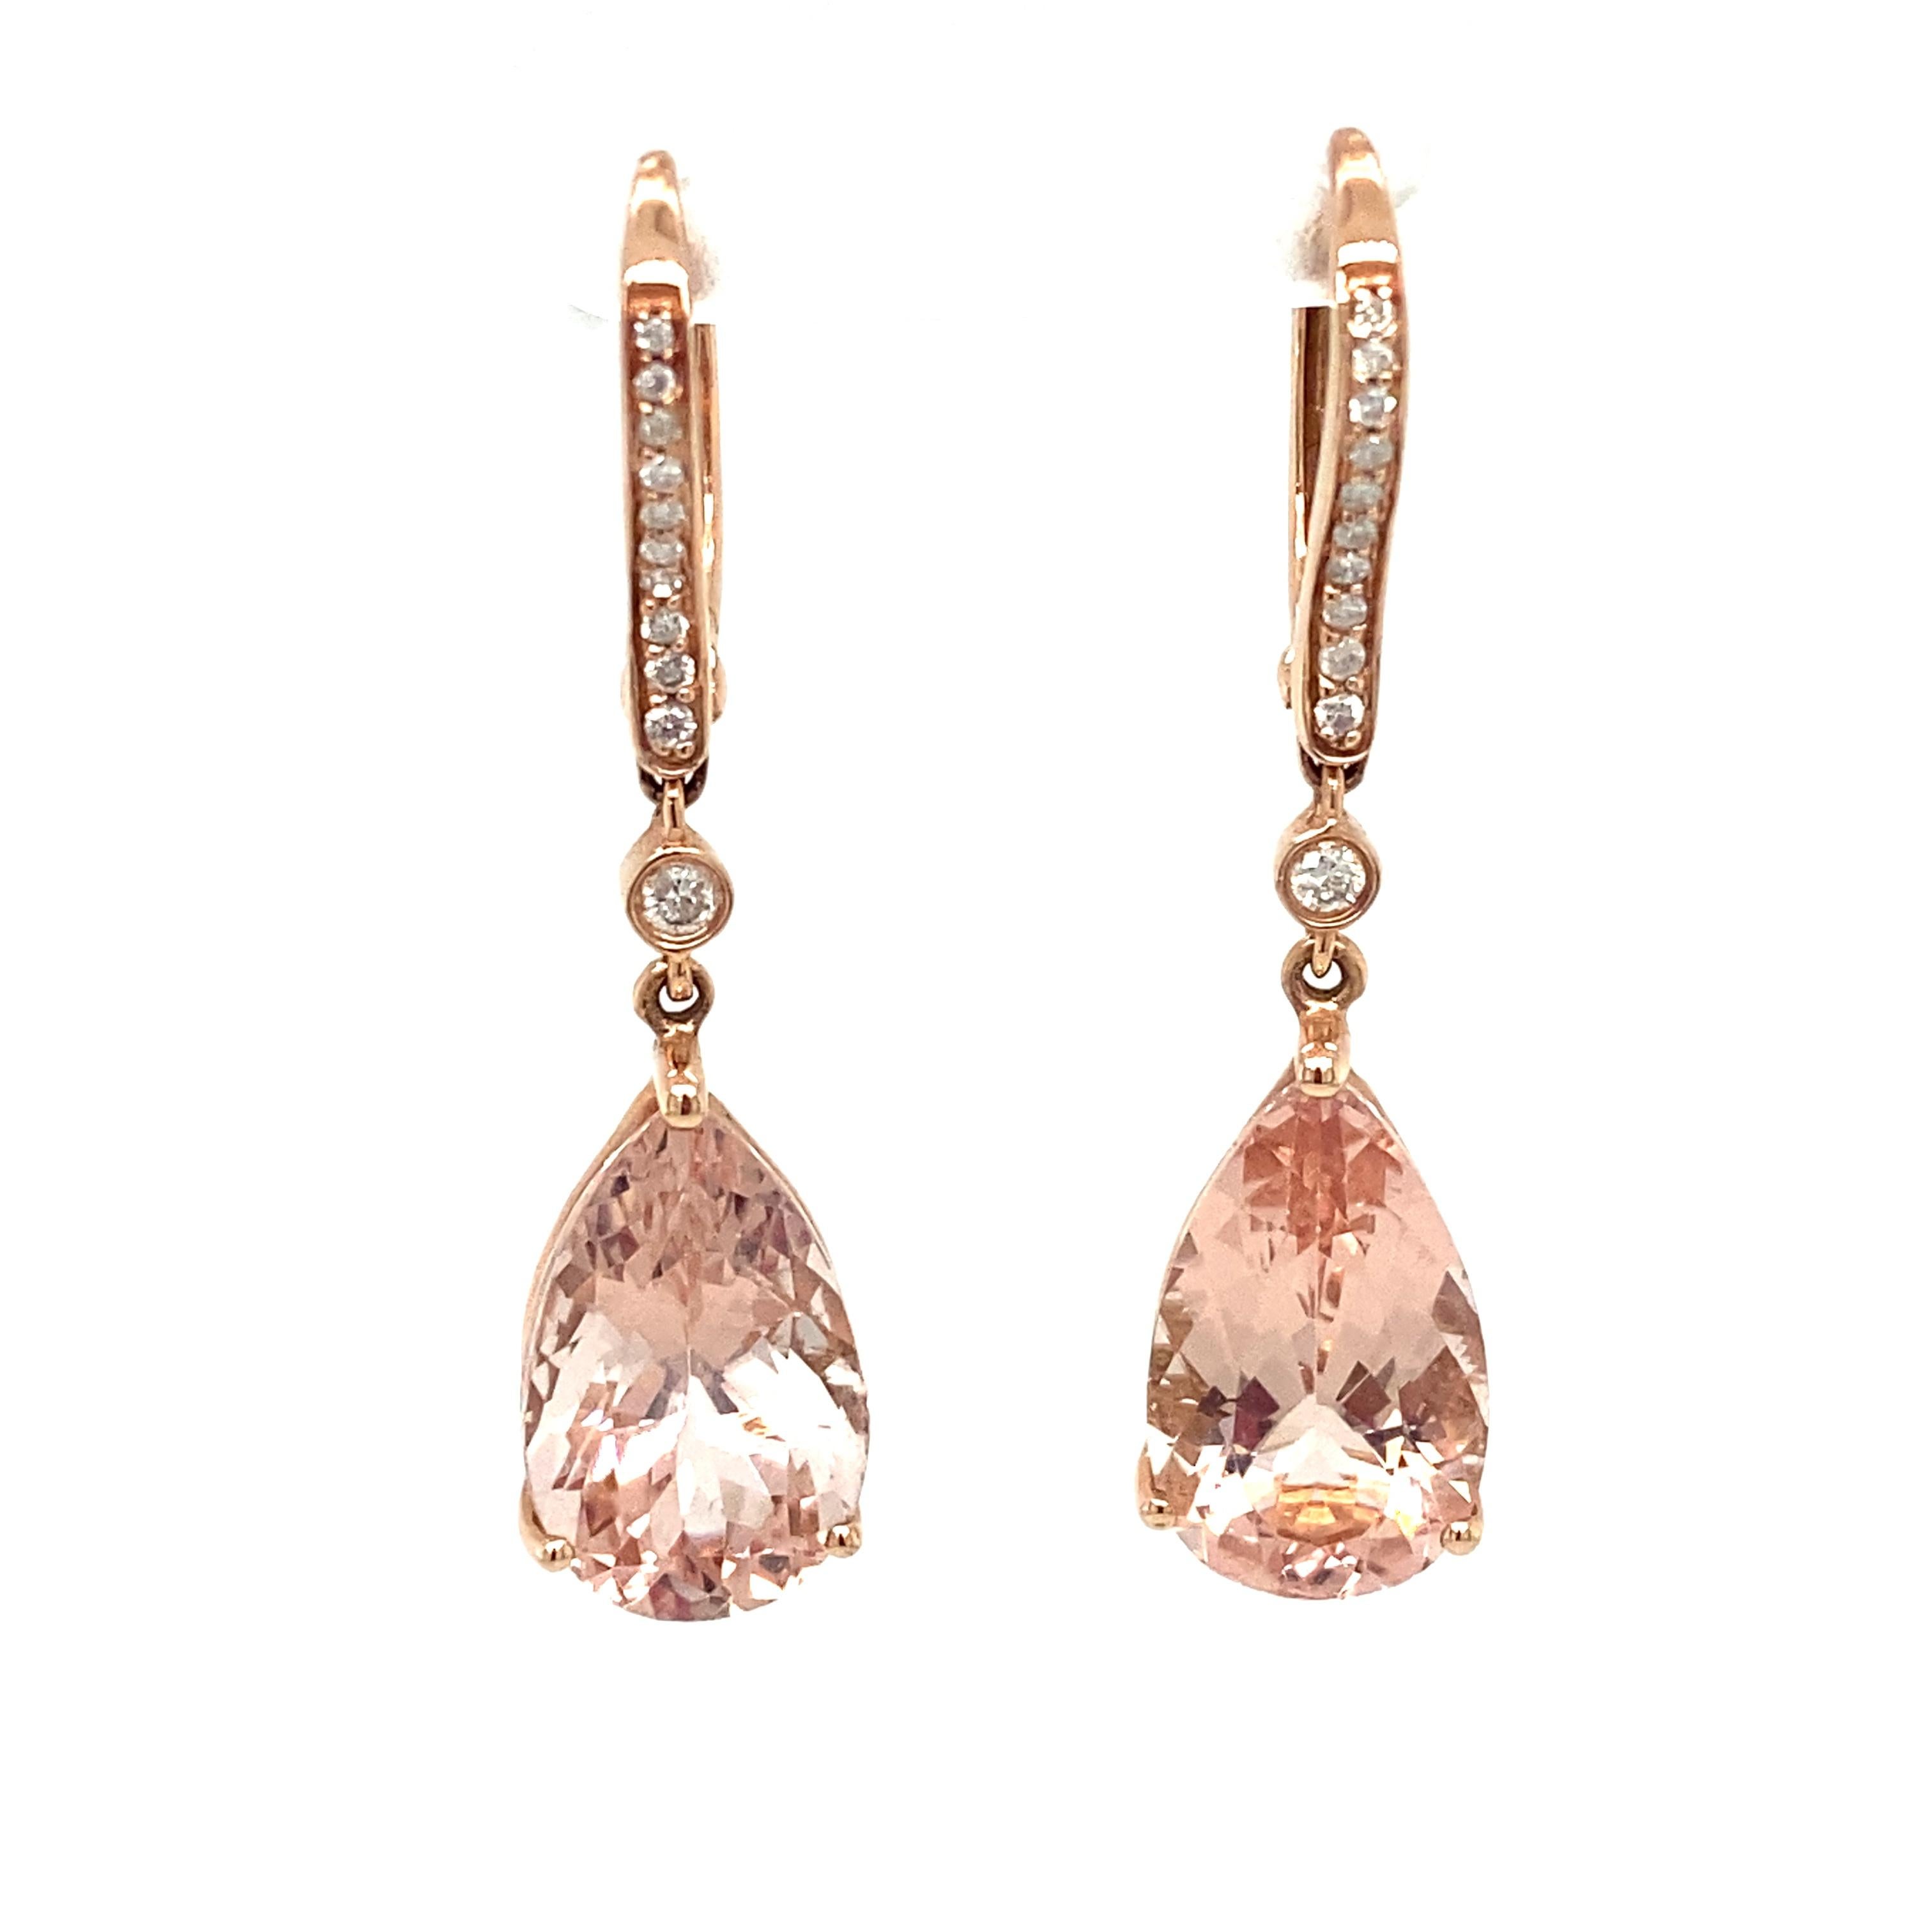 Item Details: These earrings feature beautiful pink pear cut morganites with accent diamonds.

Circa: 2000s
Metal Type: 14k rose gold
Weight: 5.7g
Size: 1.5in L

Diamond Details:

Carat: 0.30 carat total weight
Shape: Round
Color: G
Clarity: